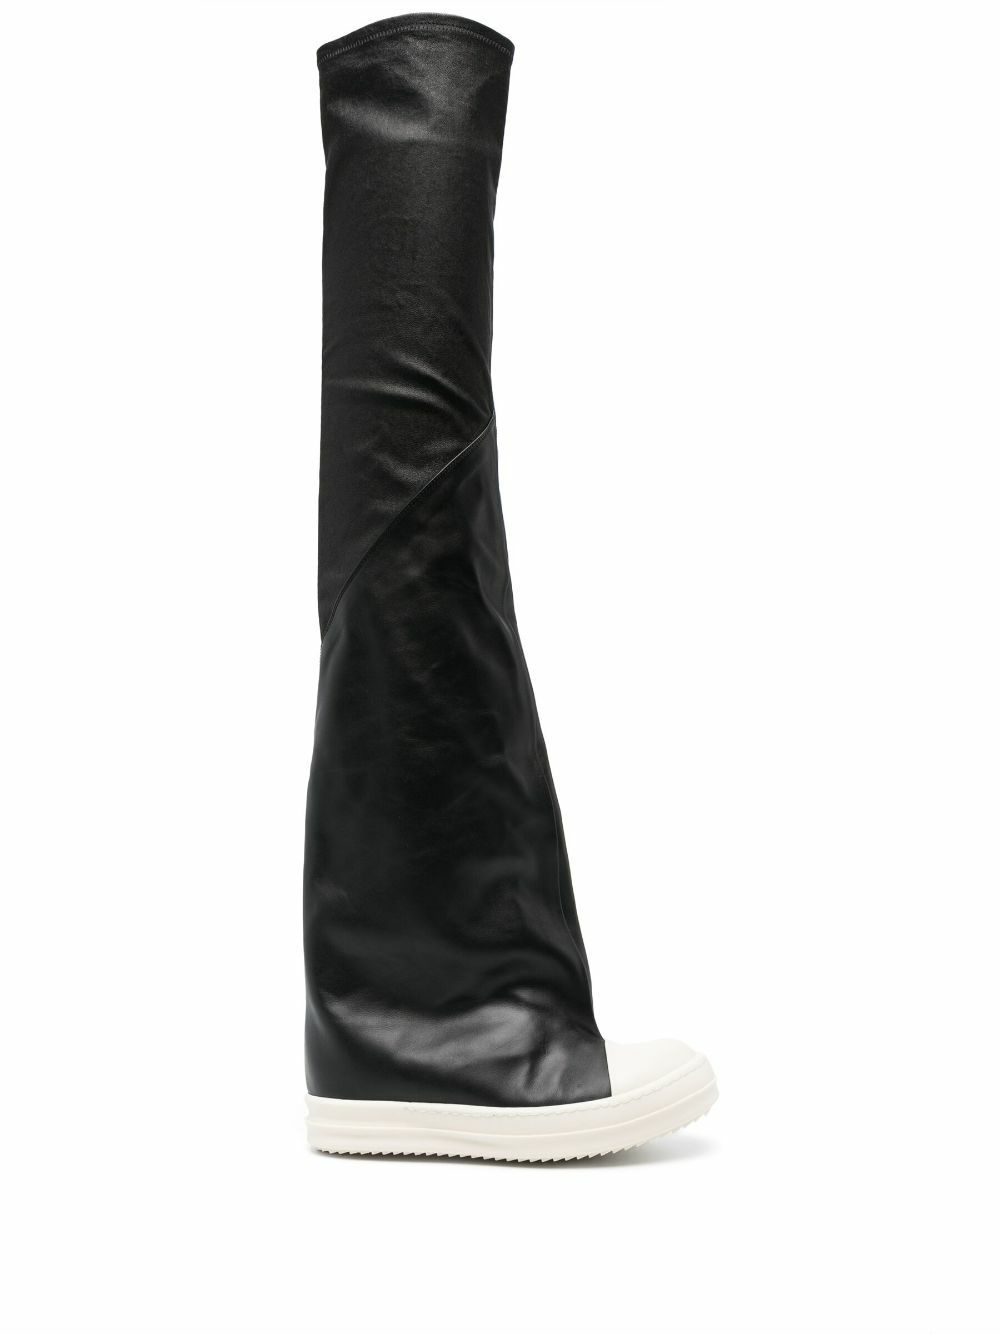 RICK OWENS - Thigh-high Leather Sneaker Boots Rick Owens